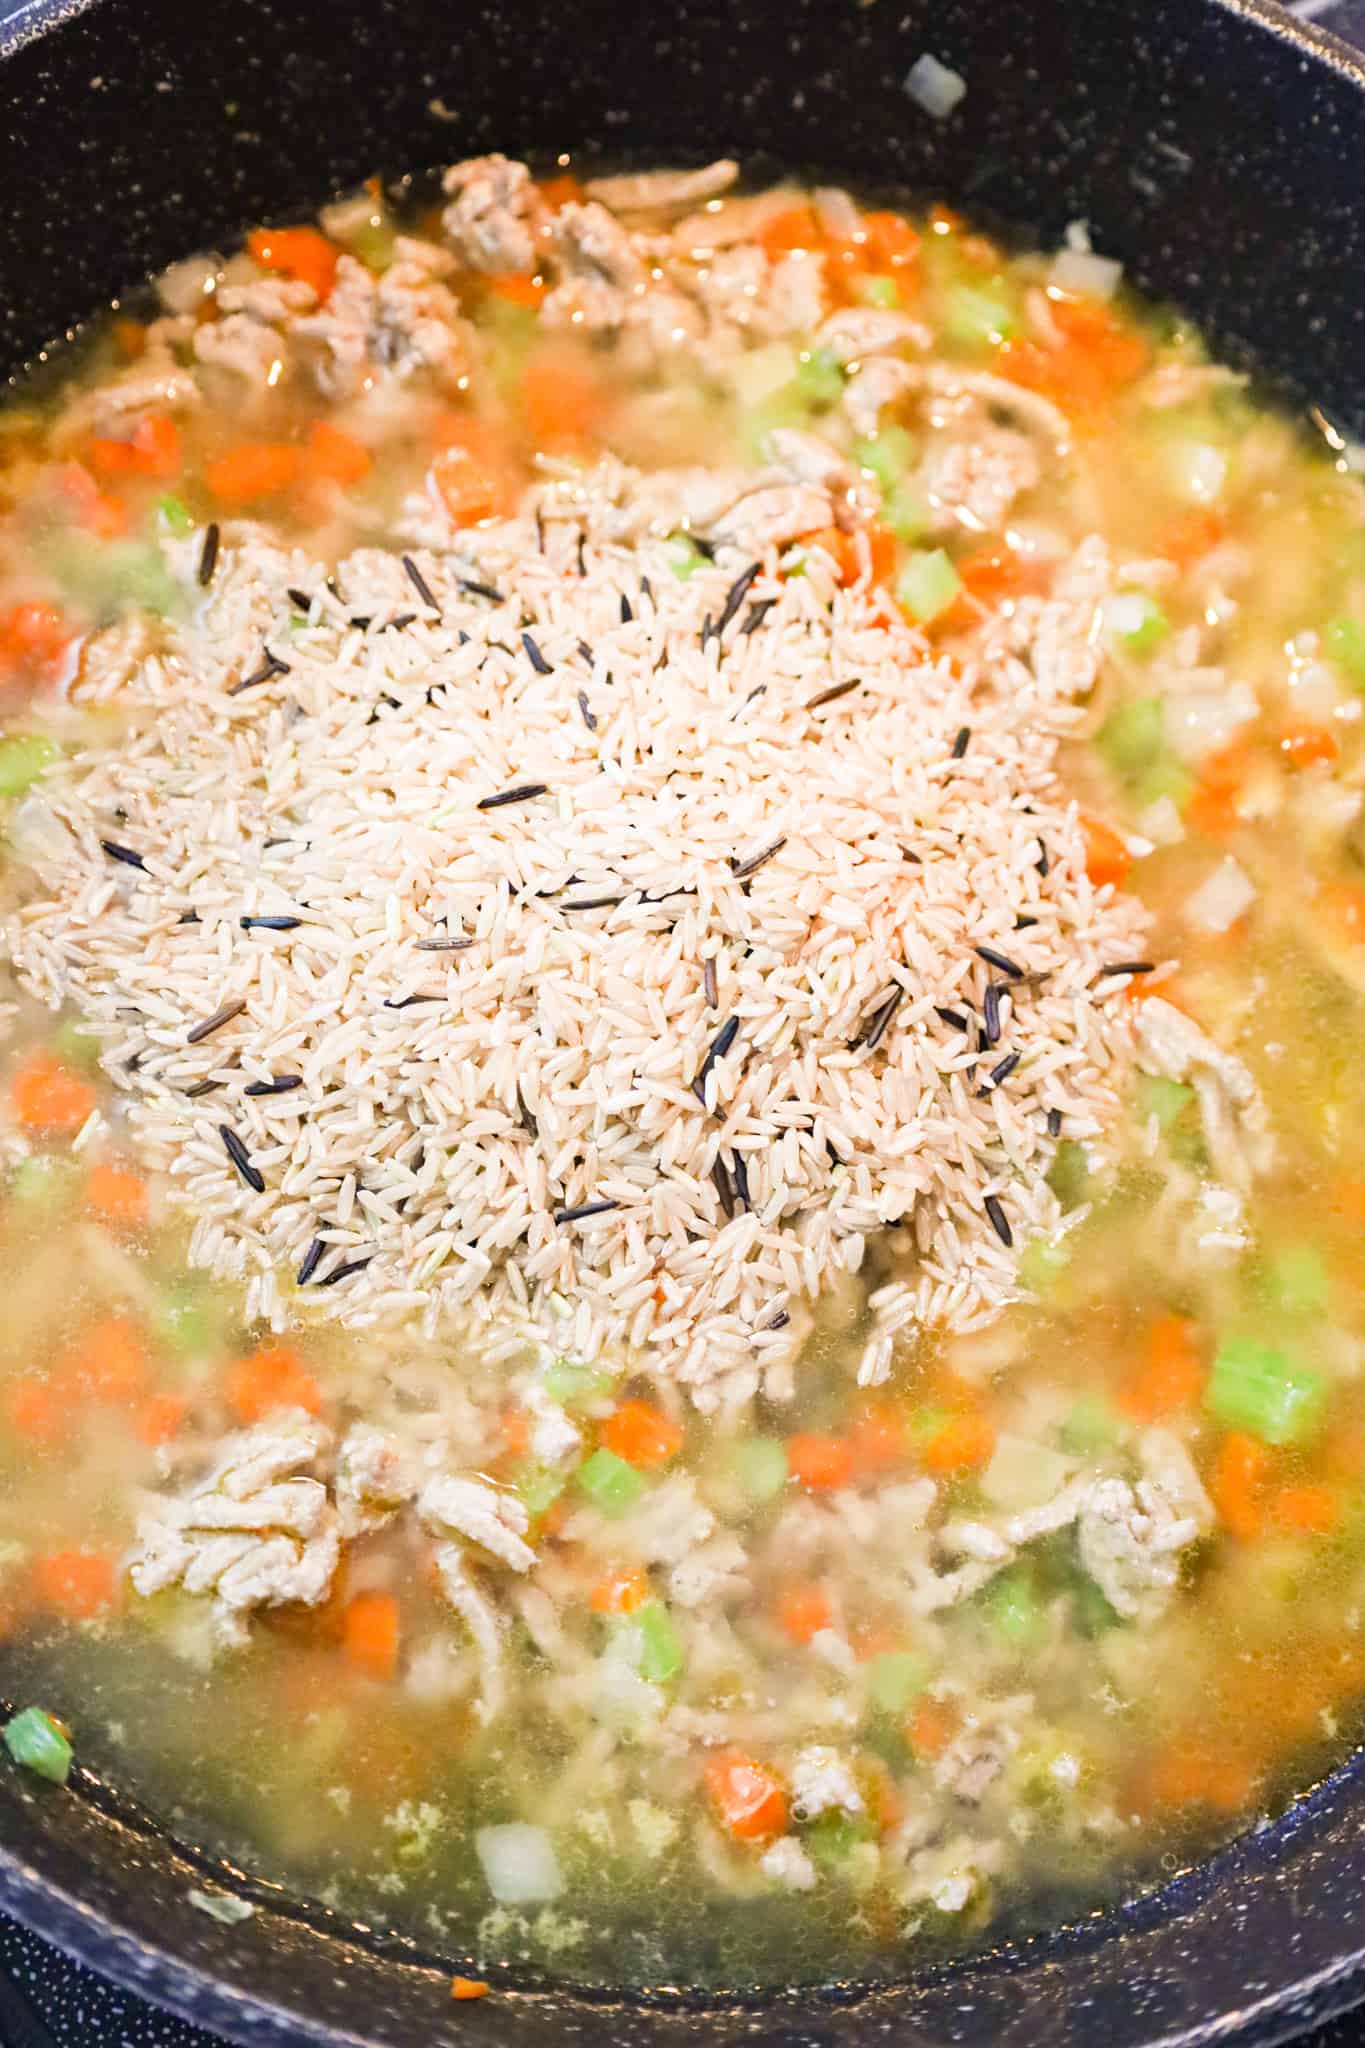 uncooked brown and wild rice blend added to chicken broth, ground turkey and diced veggies